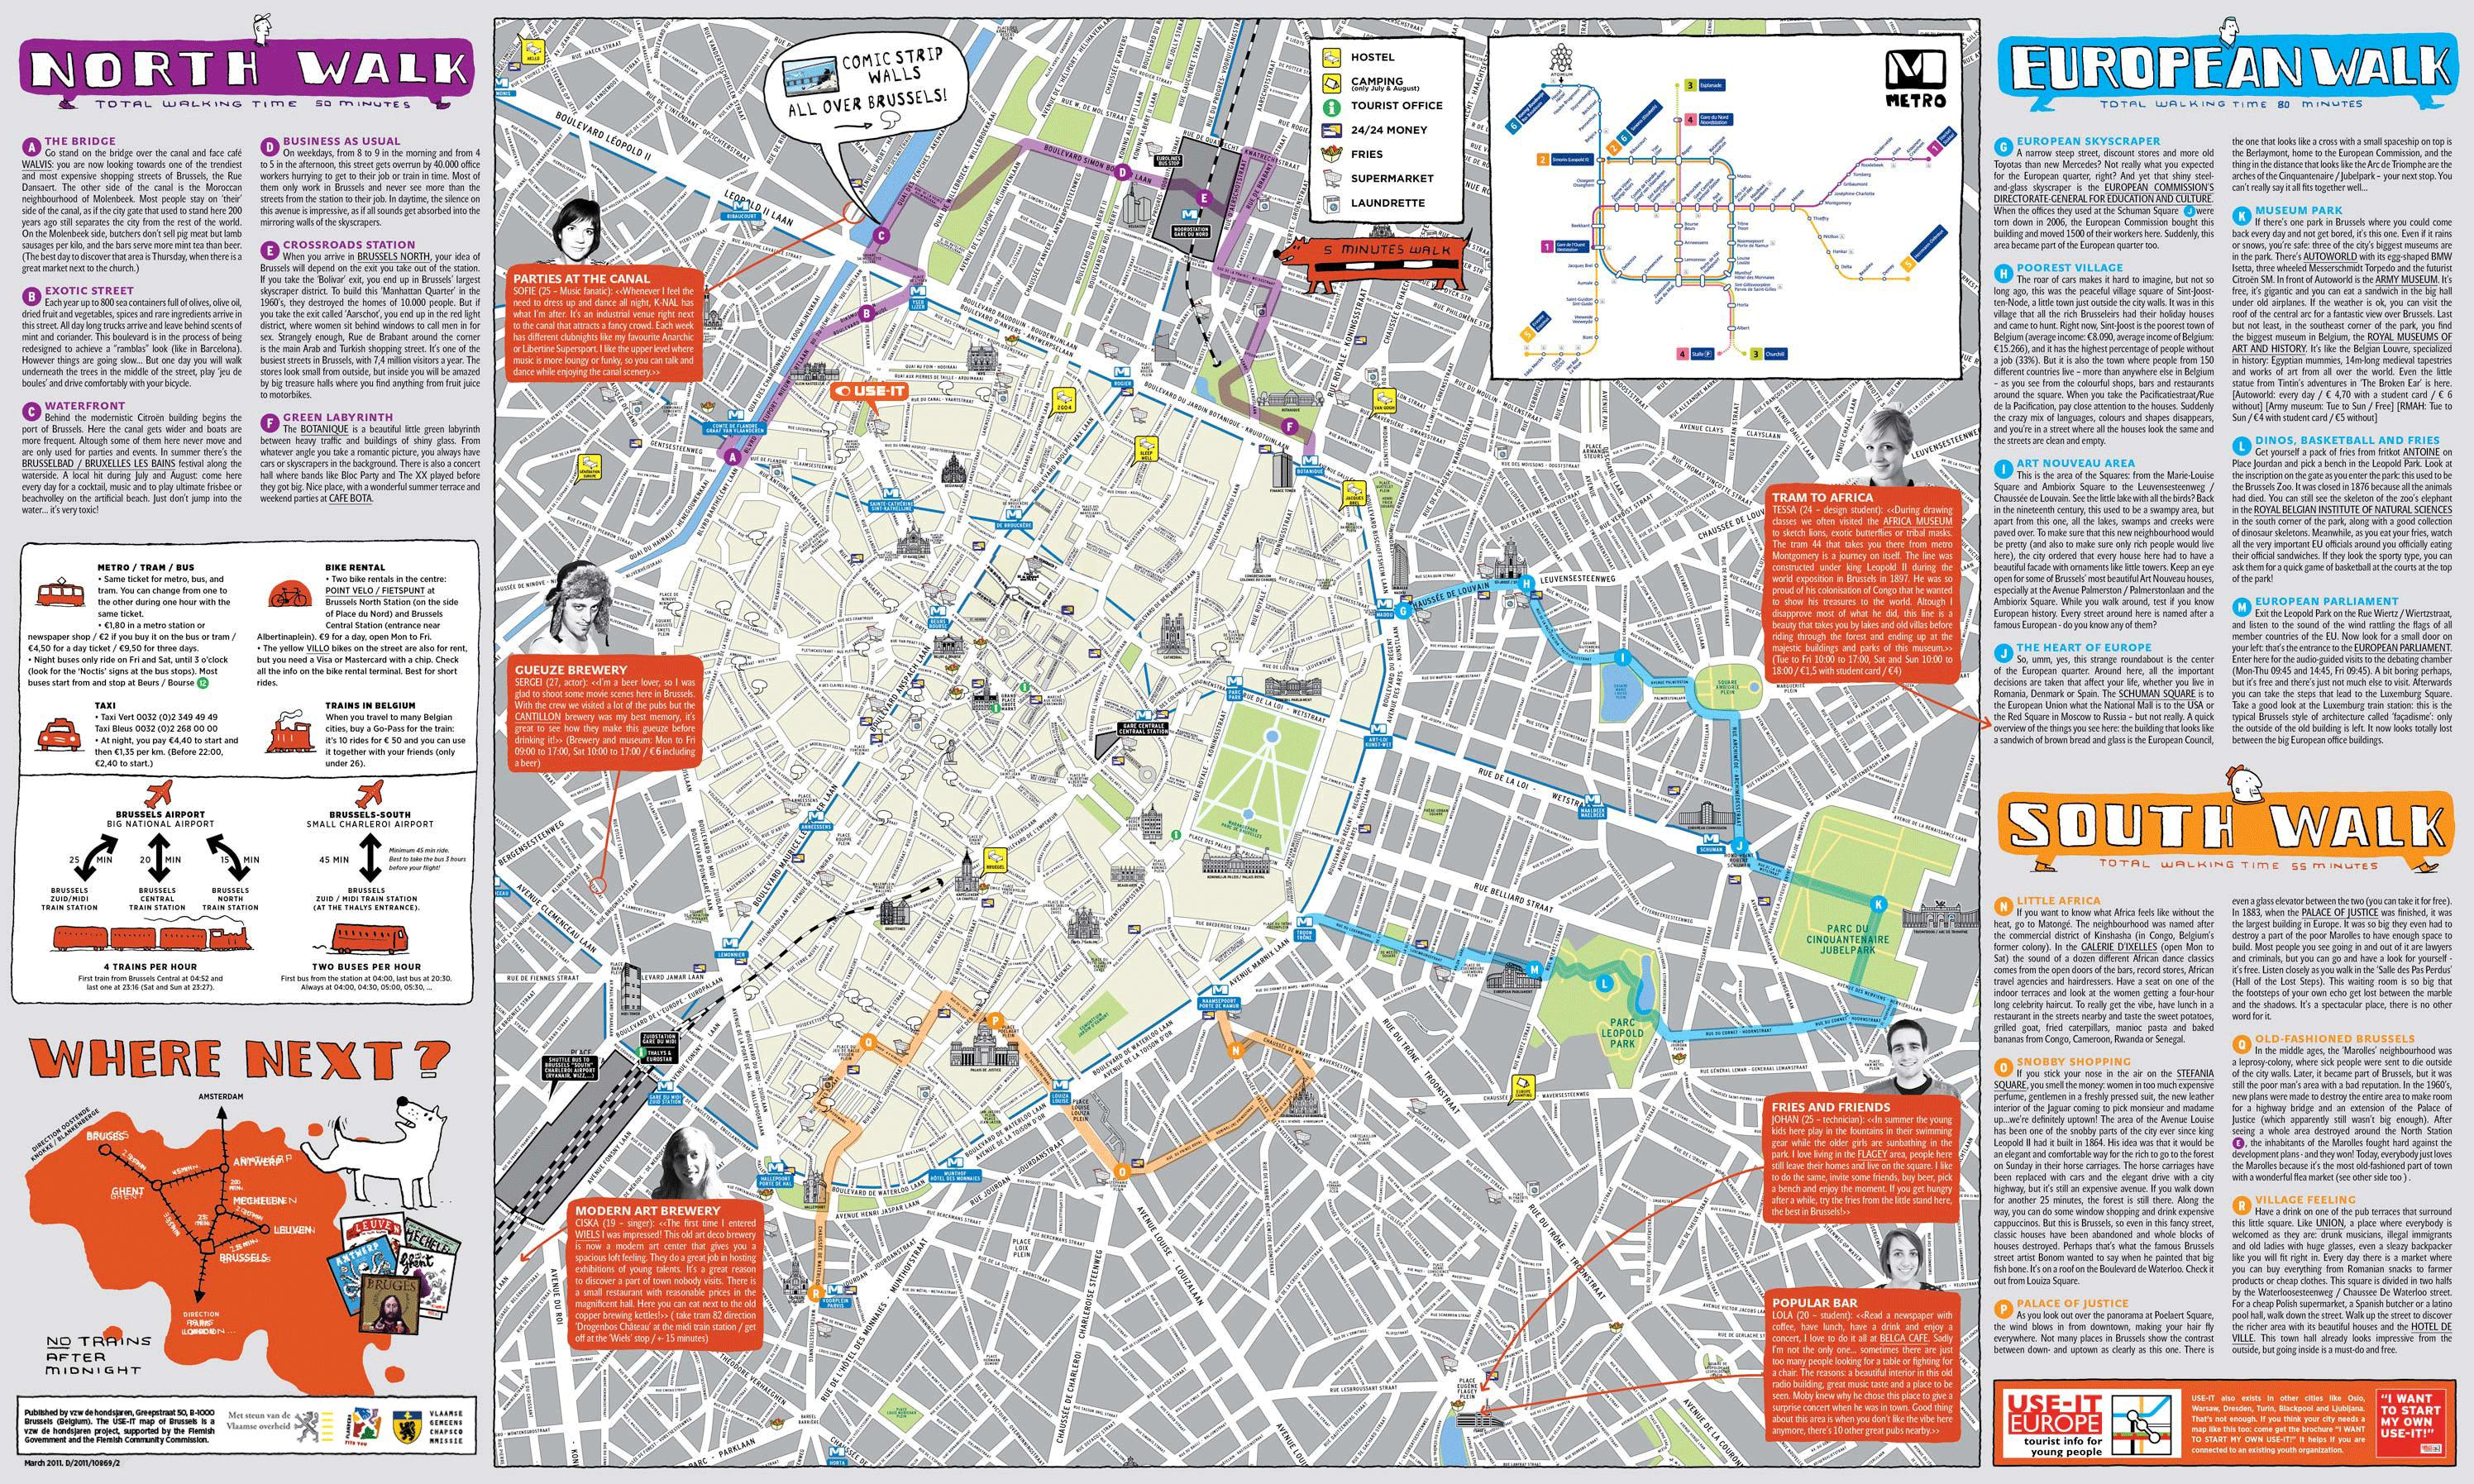 brussels tourist attractions map pdf